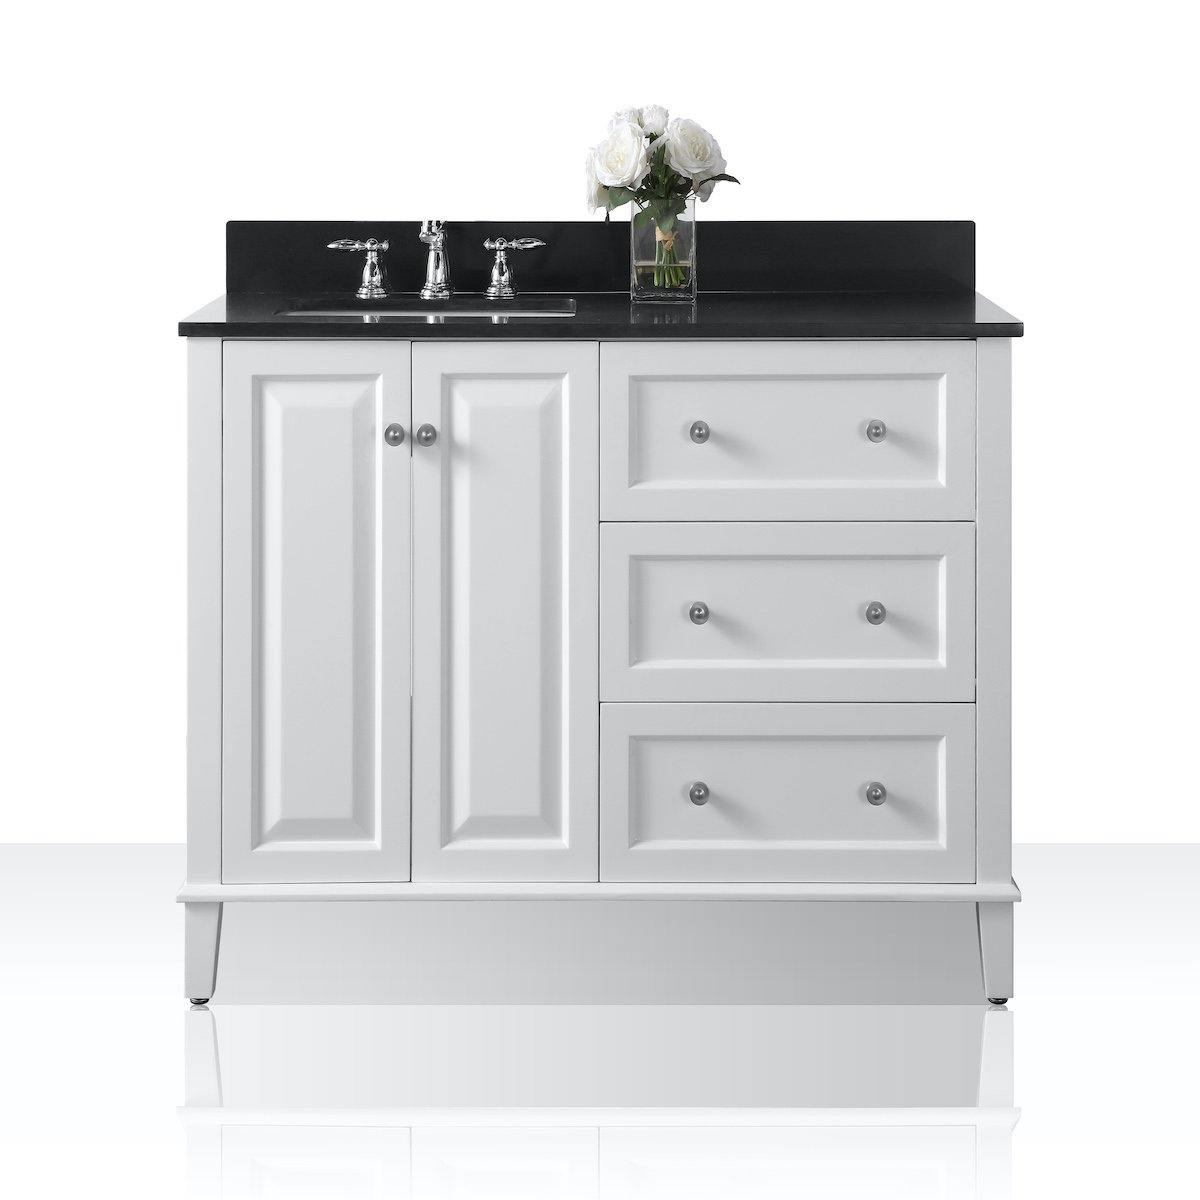 Ancerre Designs Hannah 48 Inch White Single Vanity with Left Basin and Nickel Hardware